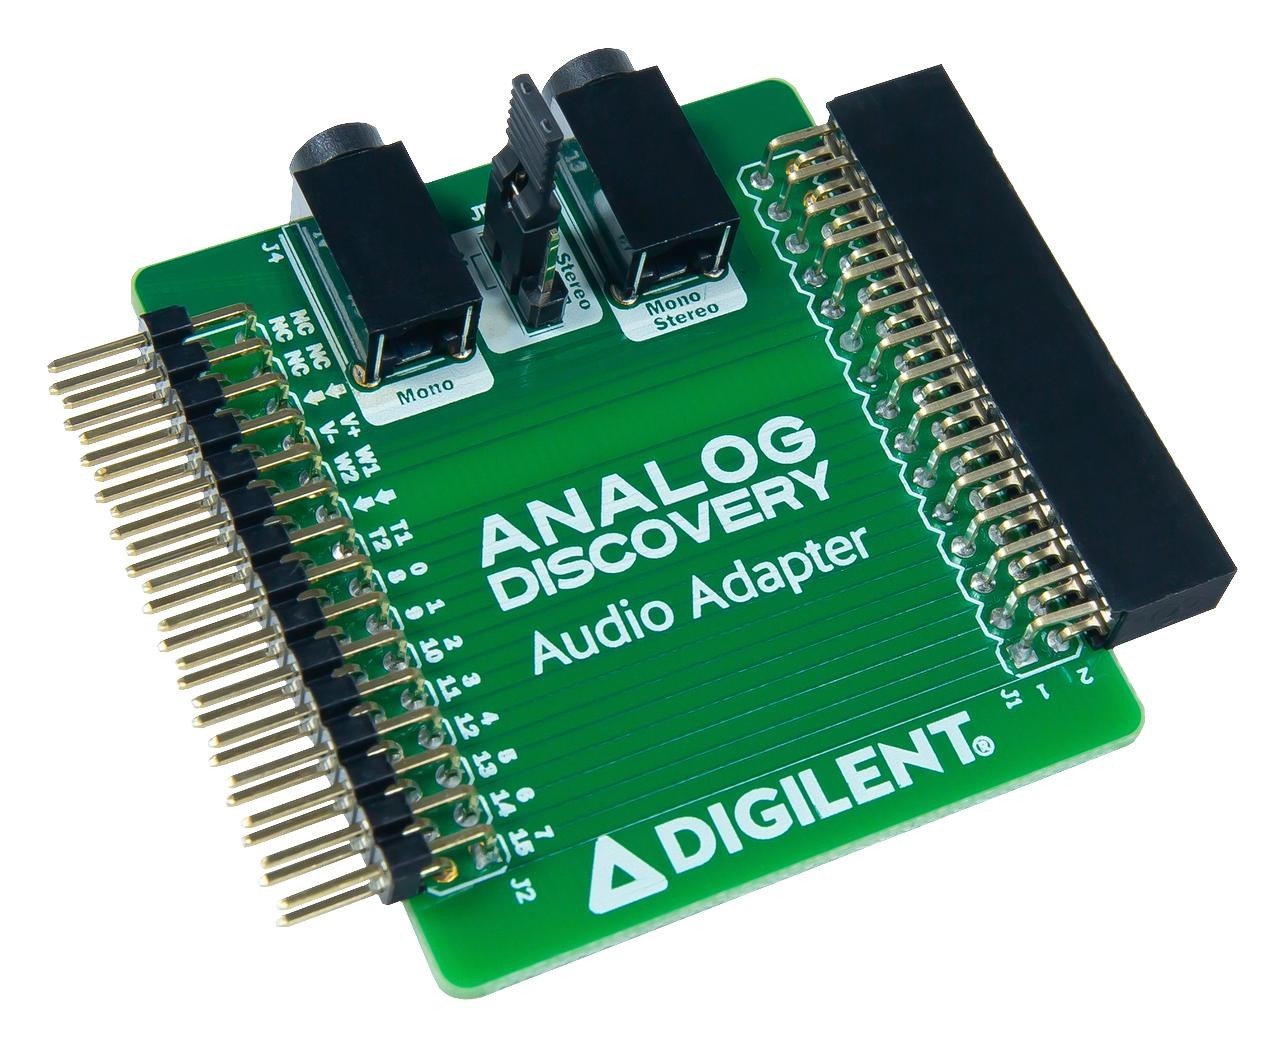 Digilent 410-405 Audio Adapter, Analog Discovery